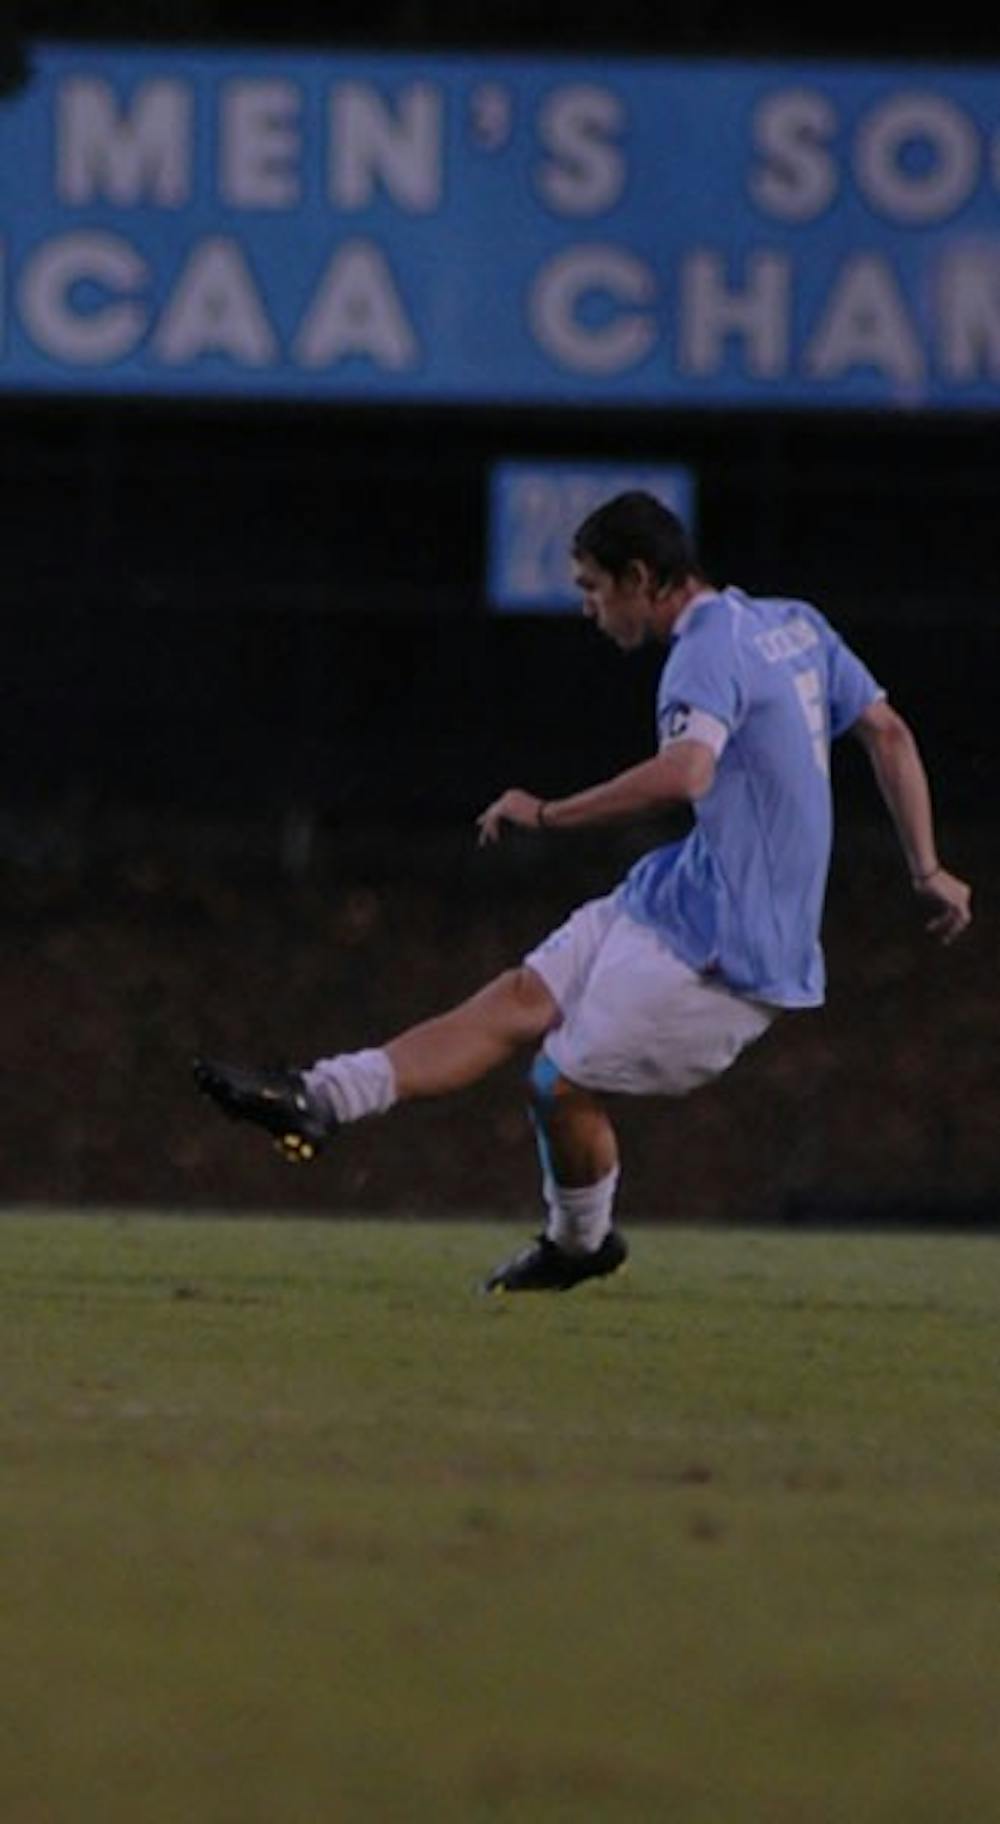 Senior captain Zach Loyd heaved the throw-in that capped UNC’s double-overtime victory. DTH/Duncan Hoge